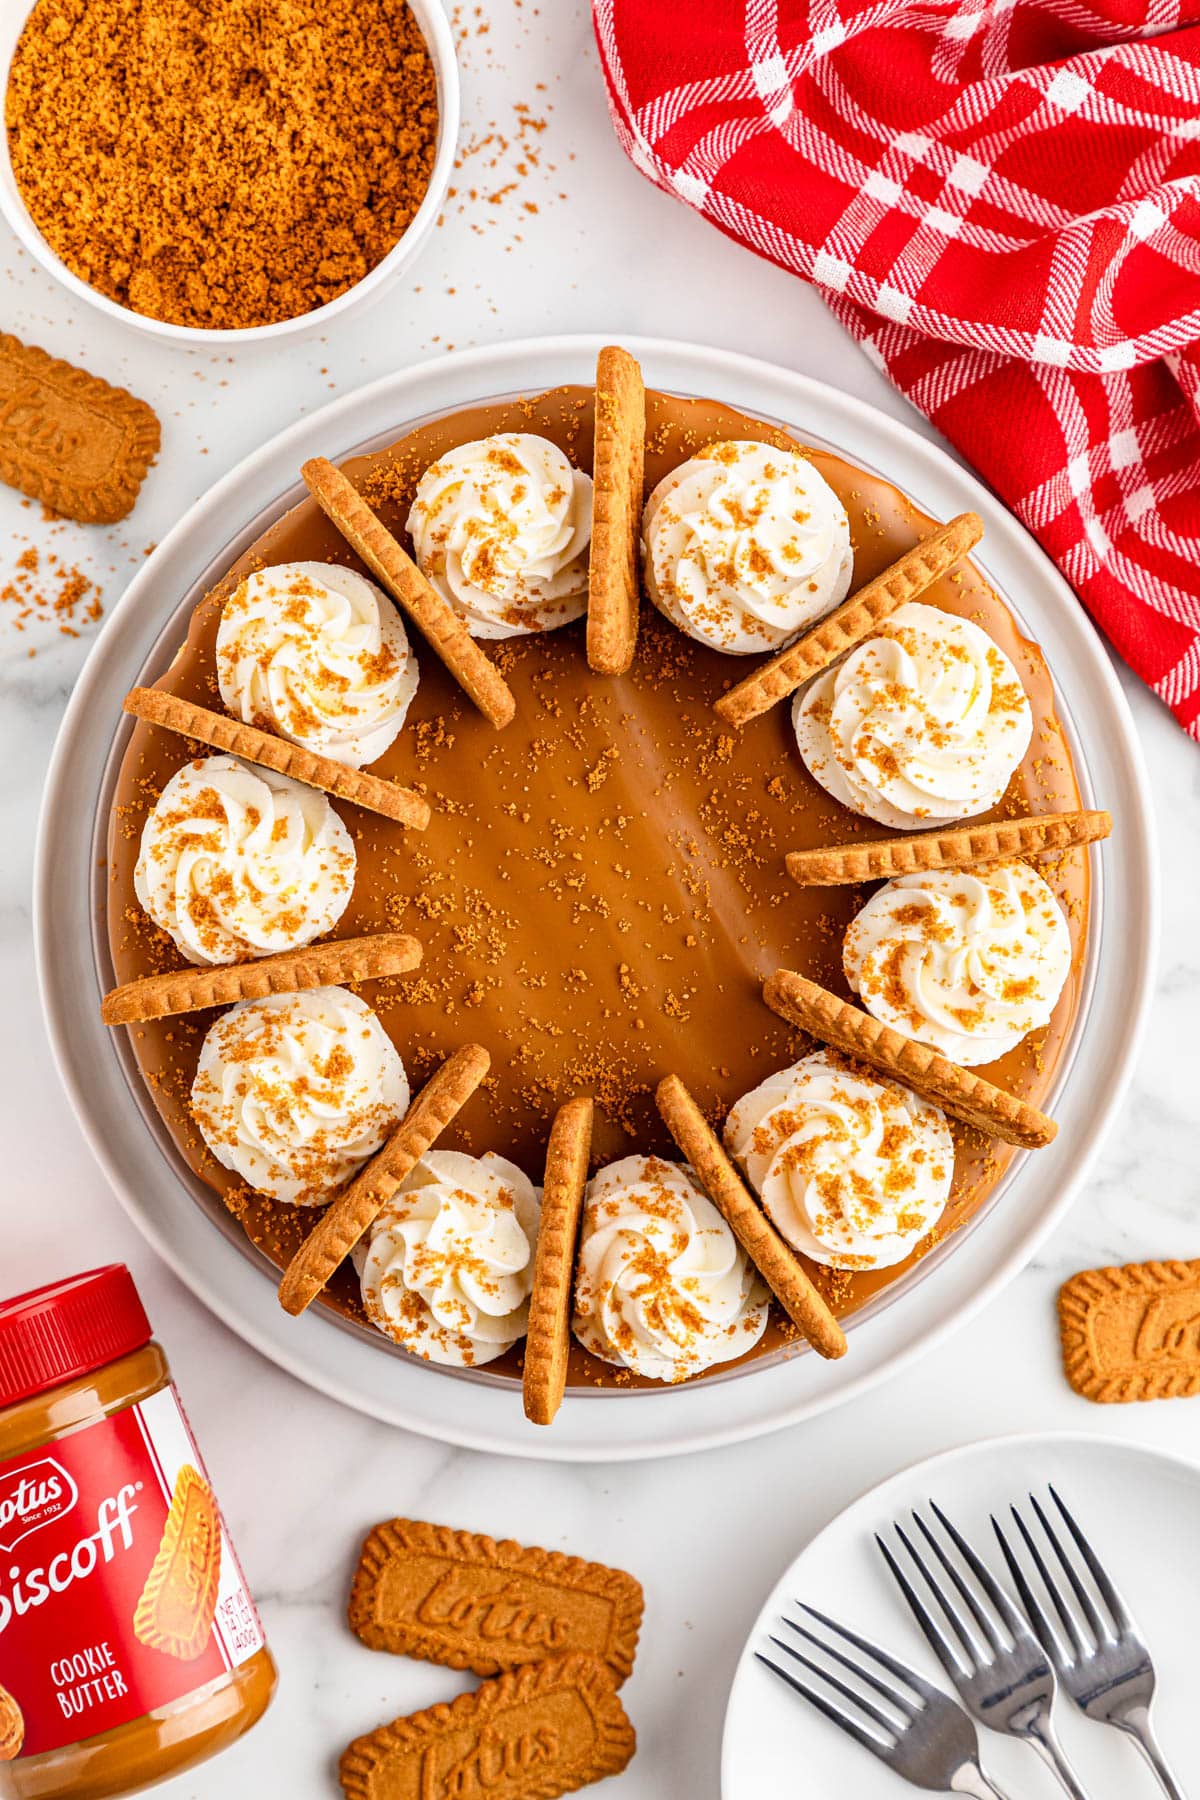 Cheesecake with cookies, Biscoff butter, and whipped cream.